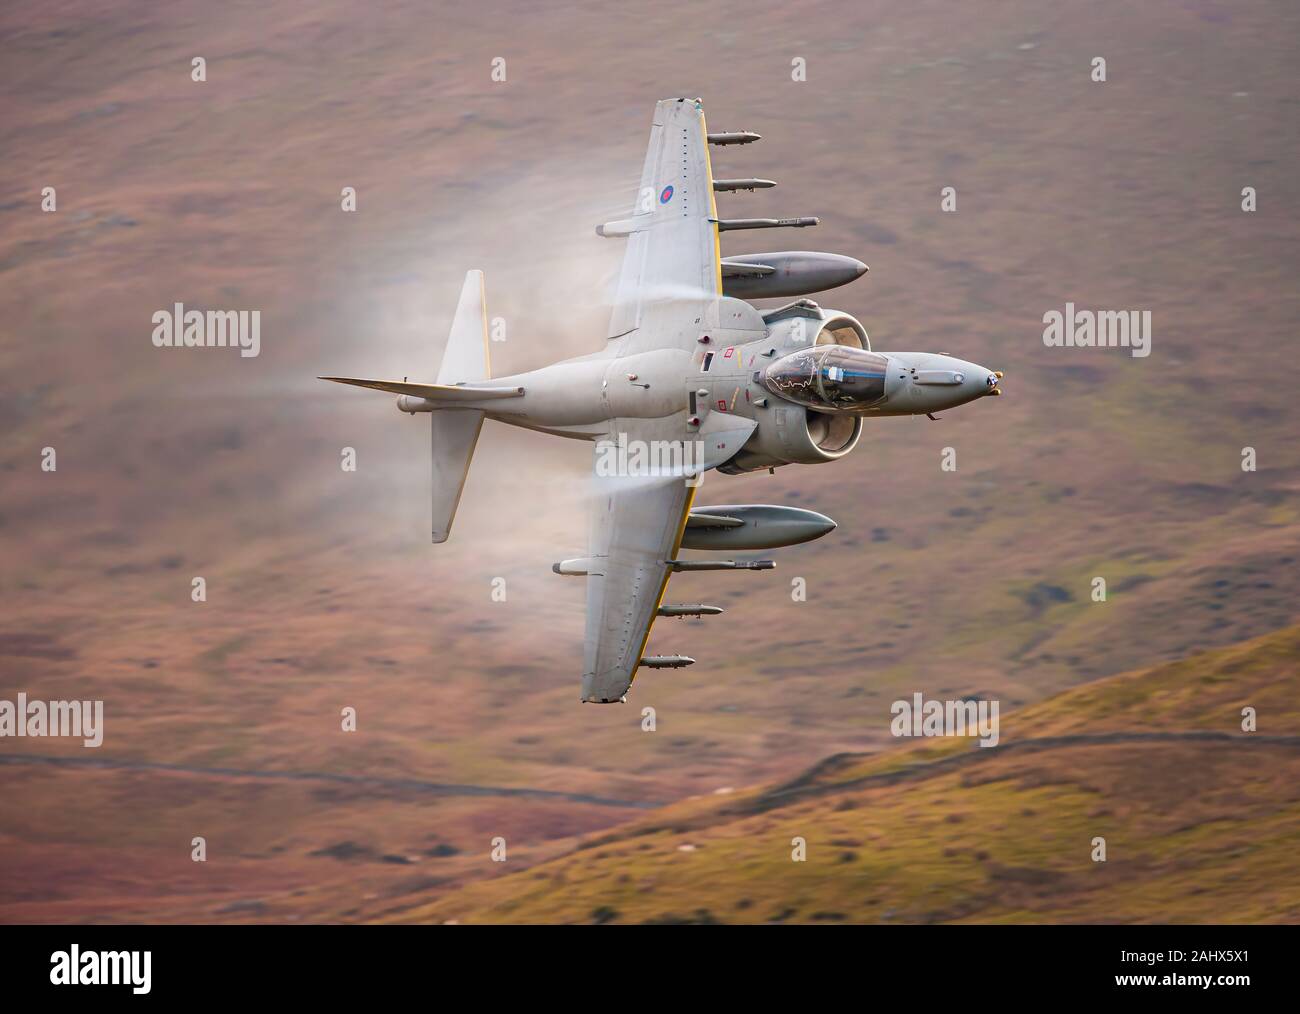 Low flying aircraft Stock Photo